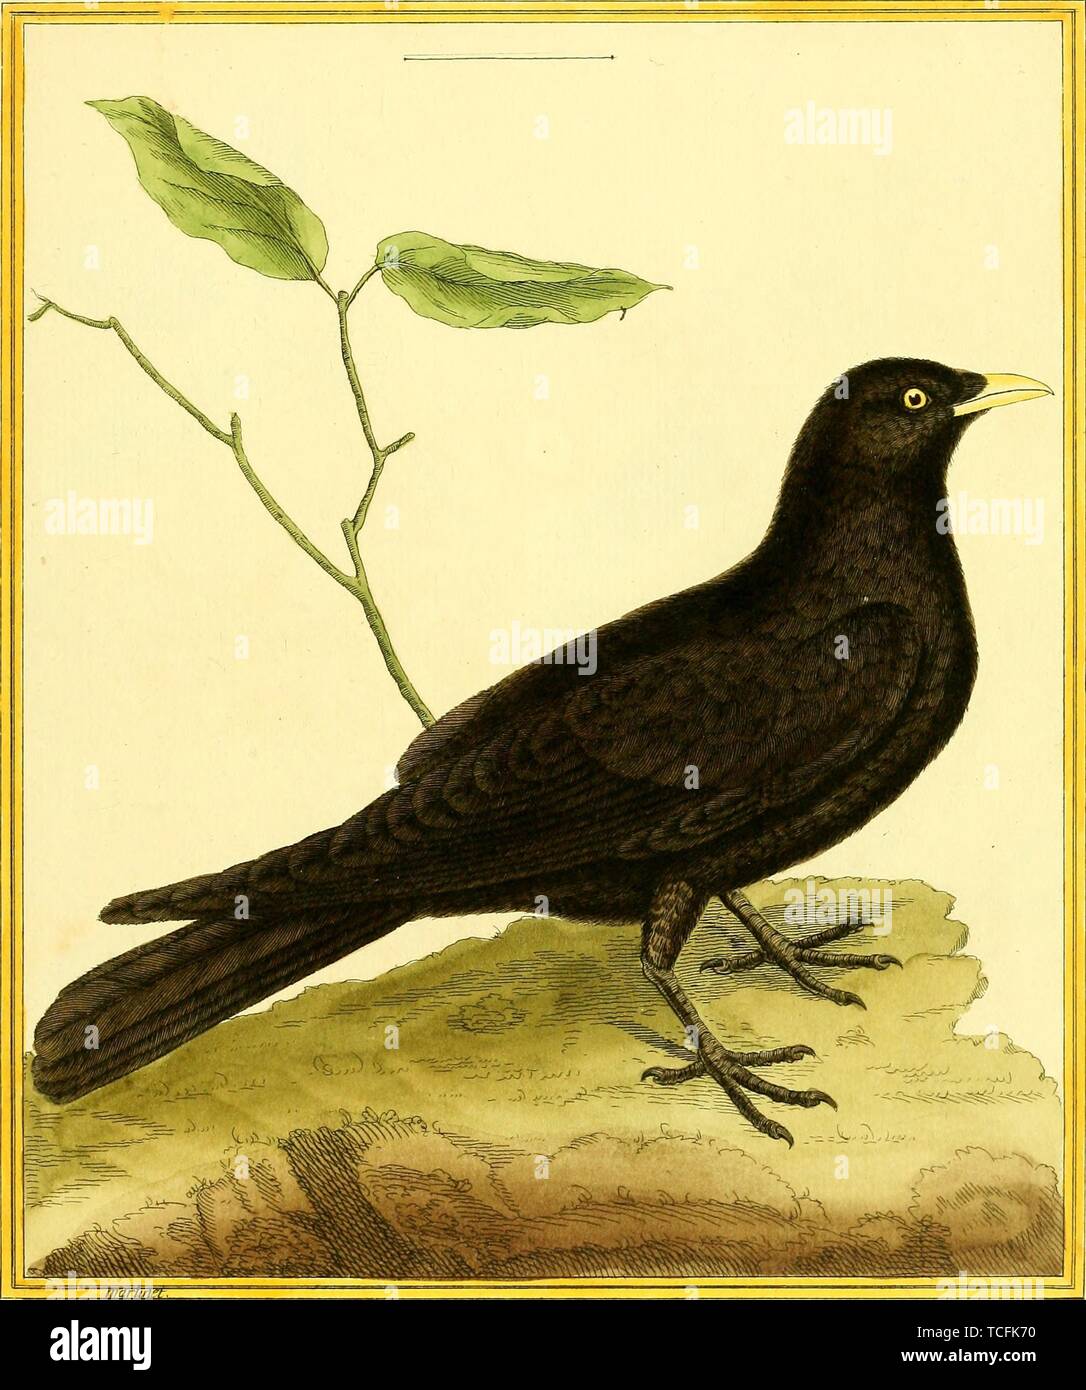 Engraved drawing of the Boat-tailed Grackle (Quiscalus major), from the book 'Planches enluminees Dhistoire naturelle' by Francois Nicolas, Louis Jean Marie Daubenton, and Edme-Louis Daubenton, 1765. Courtesy Internet Archive. () Stock Photo